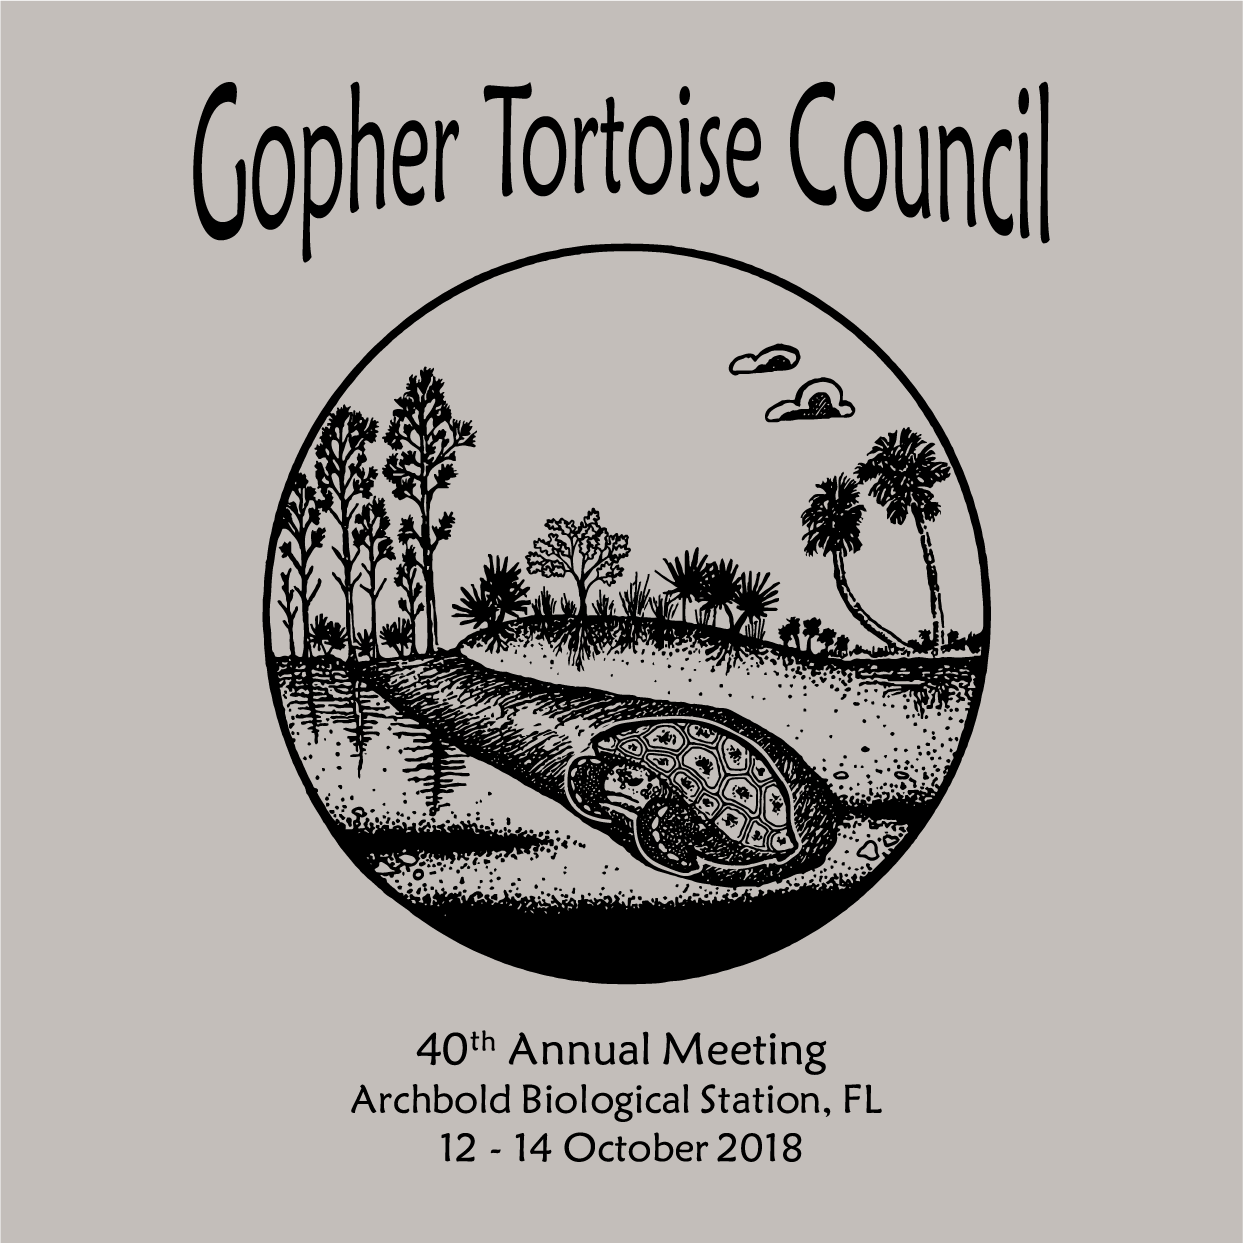 Gopher Tortoise Council 2018 shirt design - zoomed